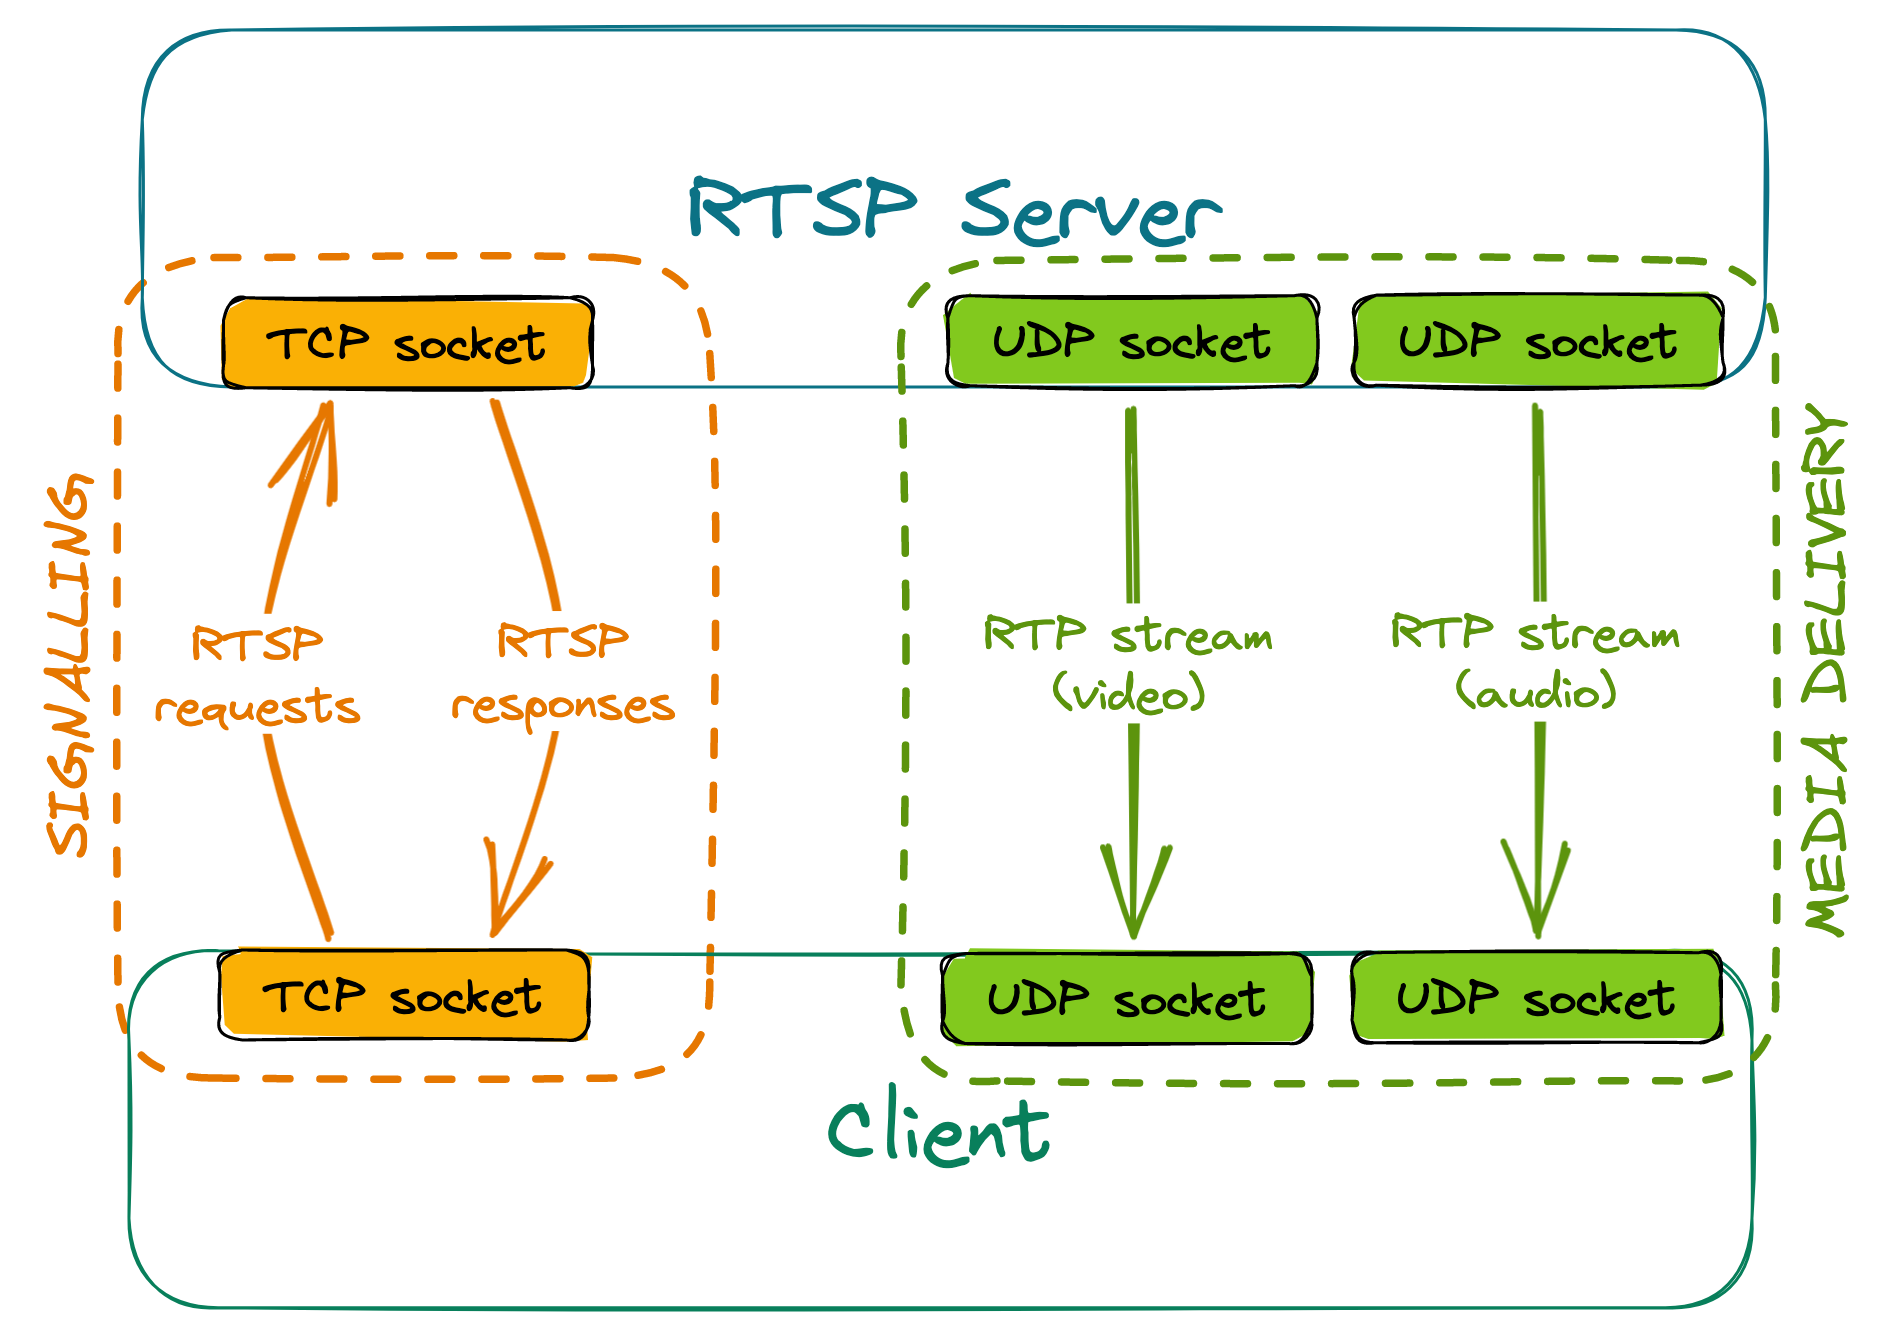 RTSP connection